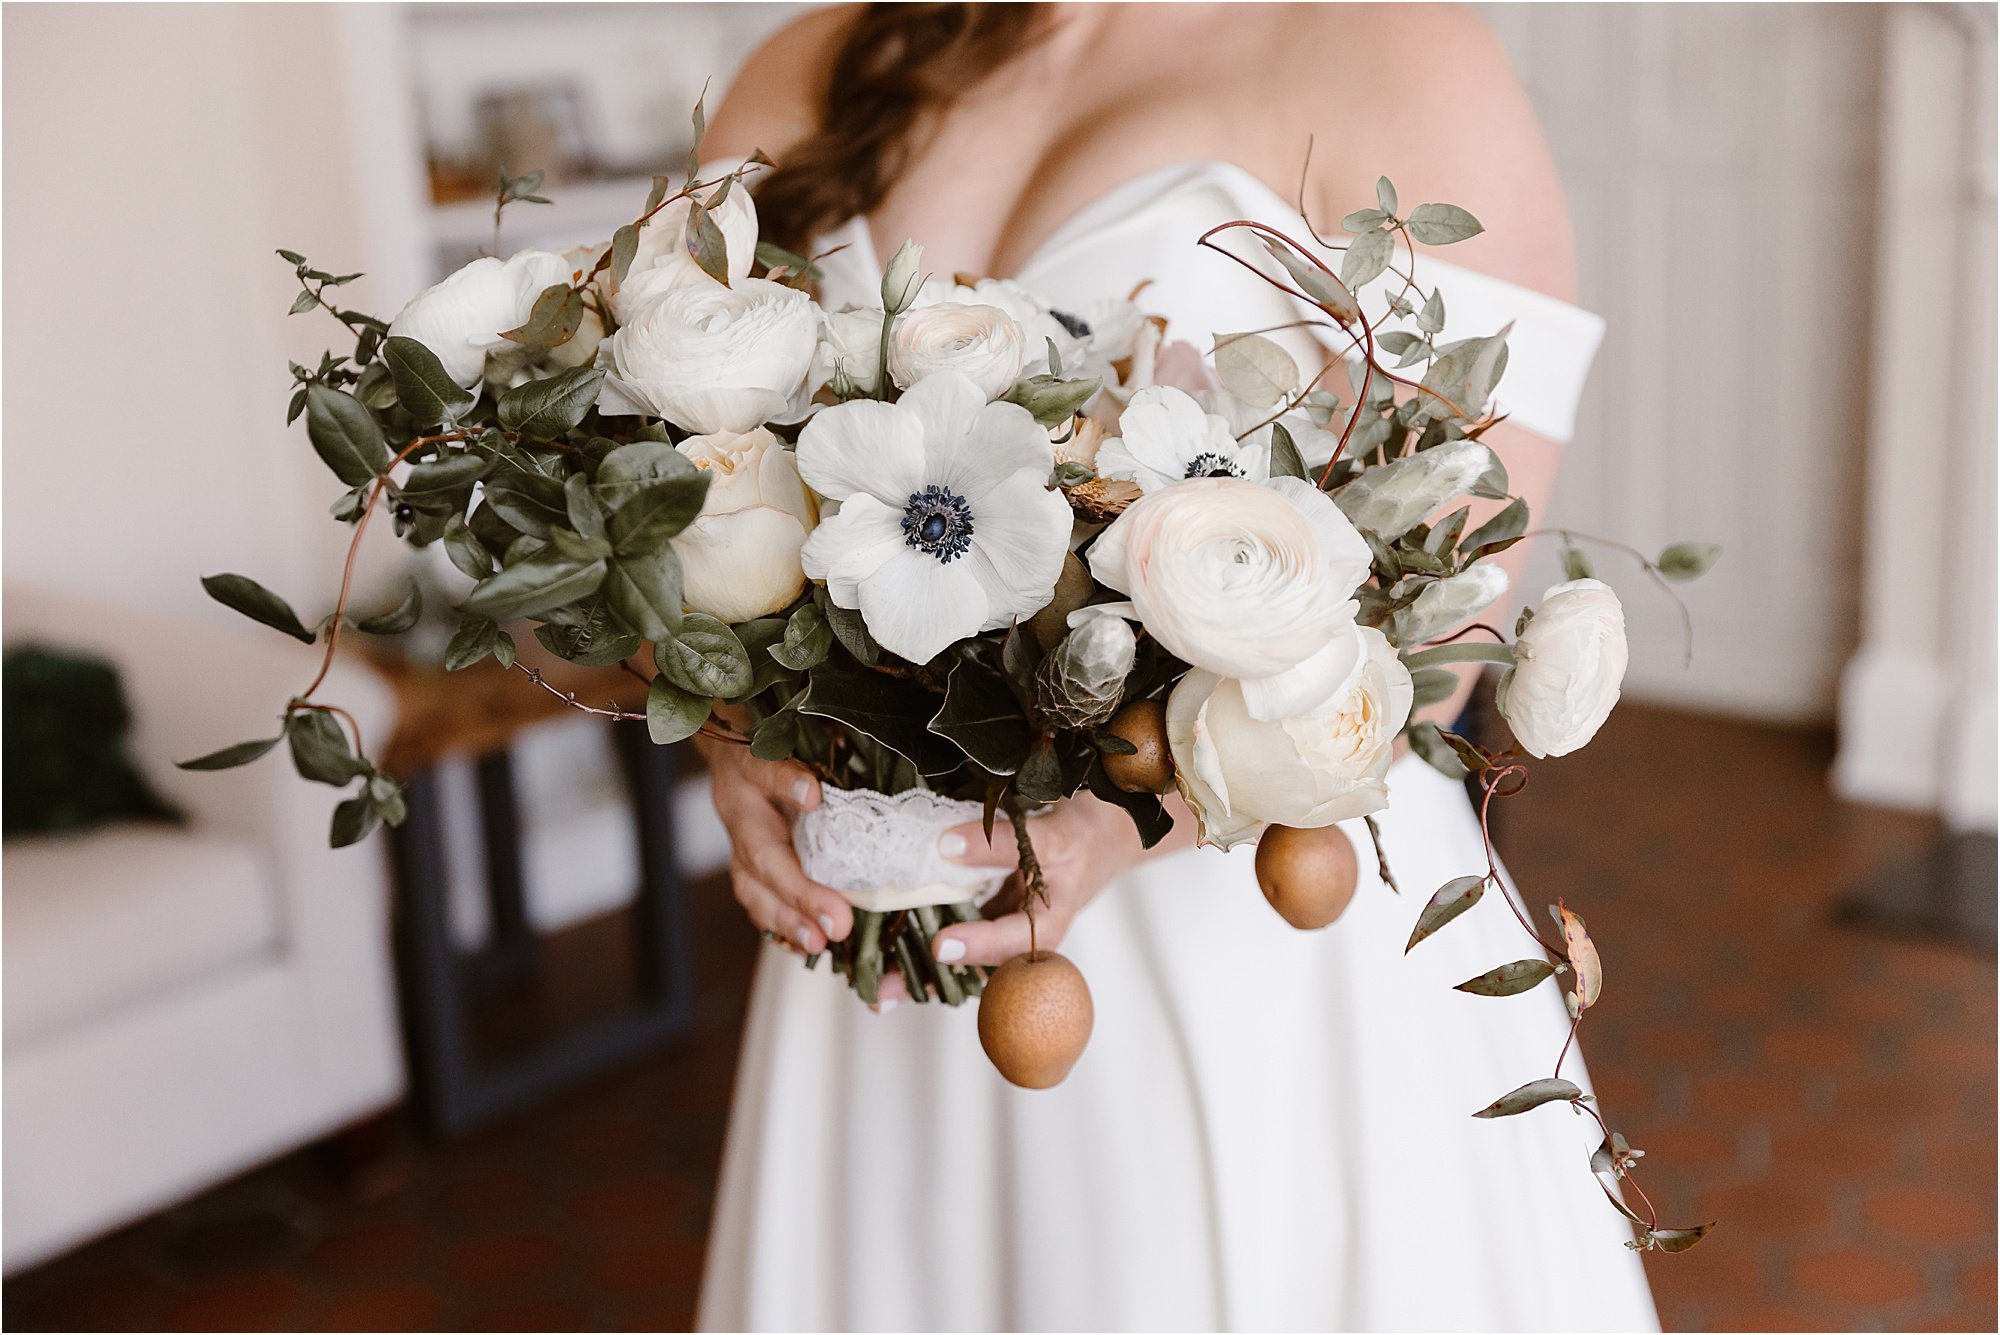 wedding bouquet with white roses and hanging pears with leaves